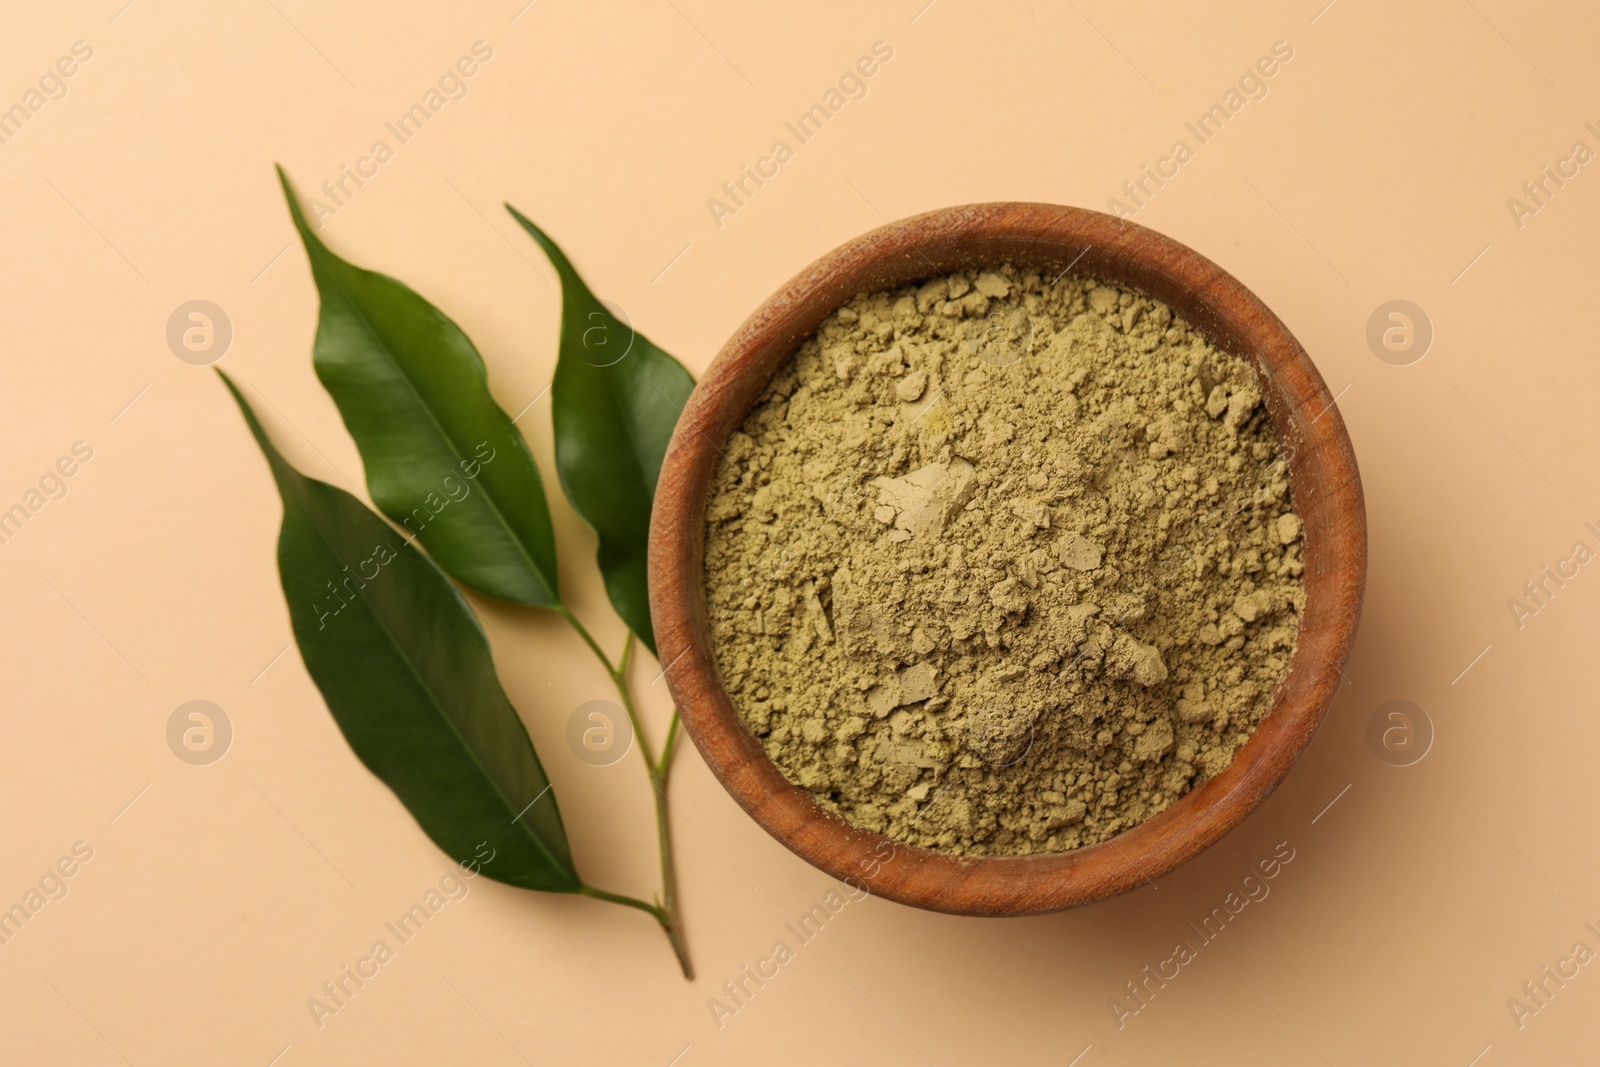 Photo of Henna powder and green leaves on beige background, flat lay. Natural hair coloring